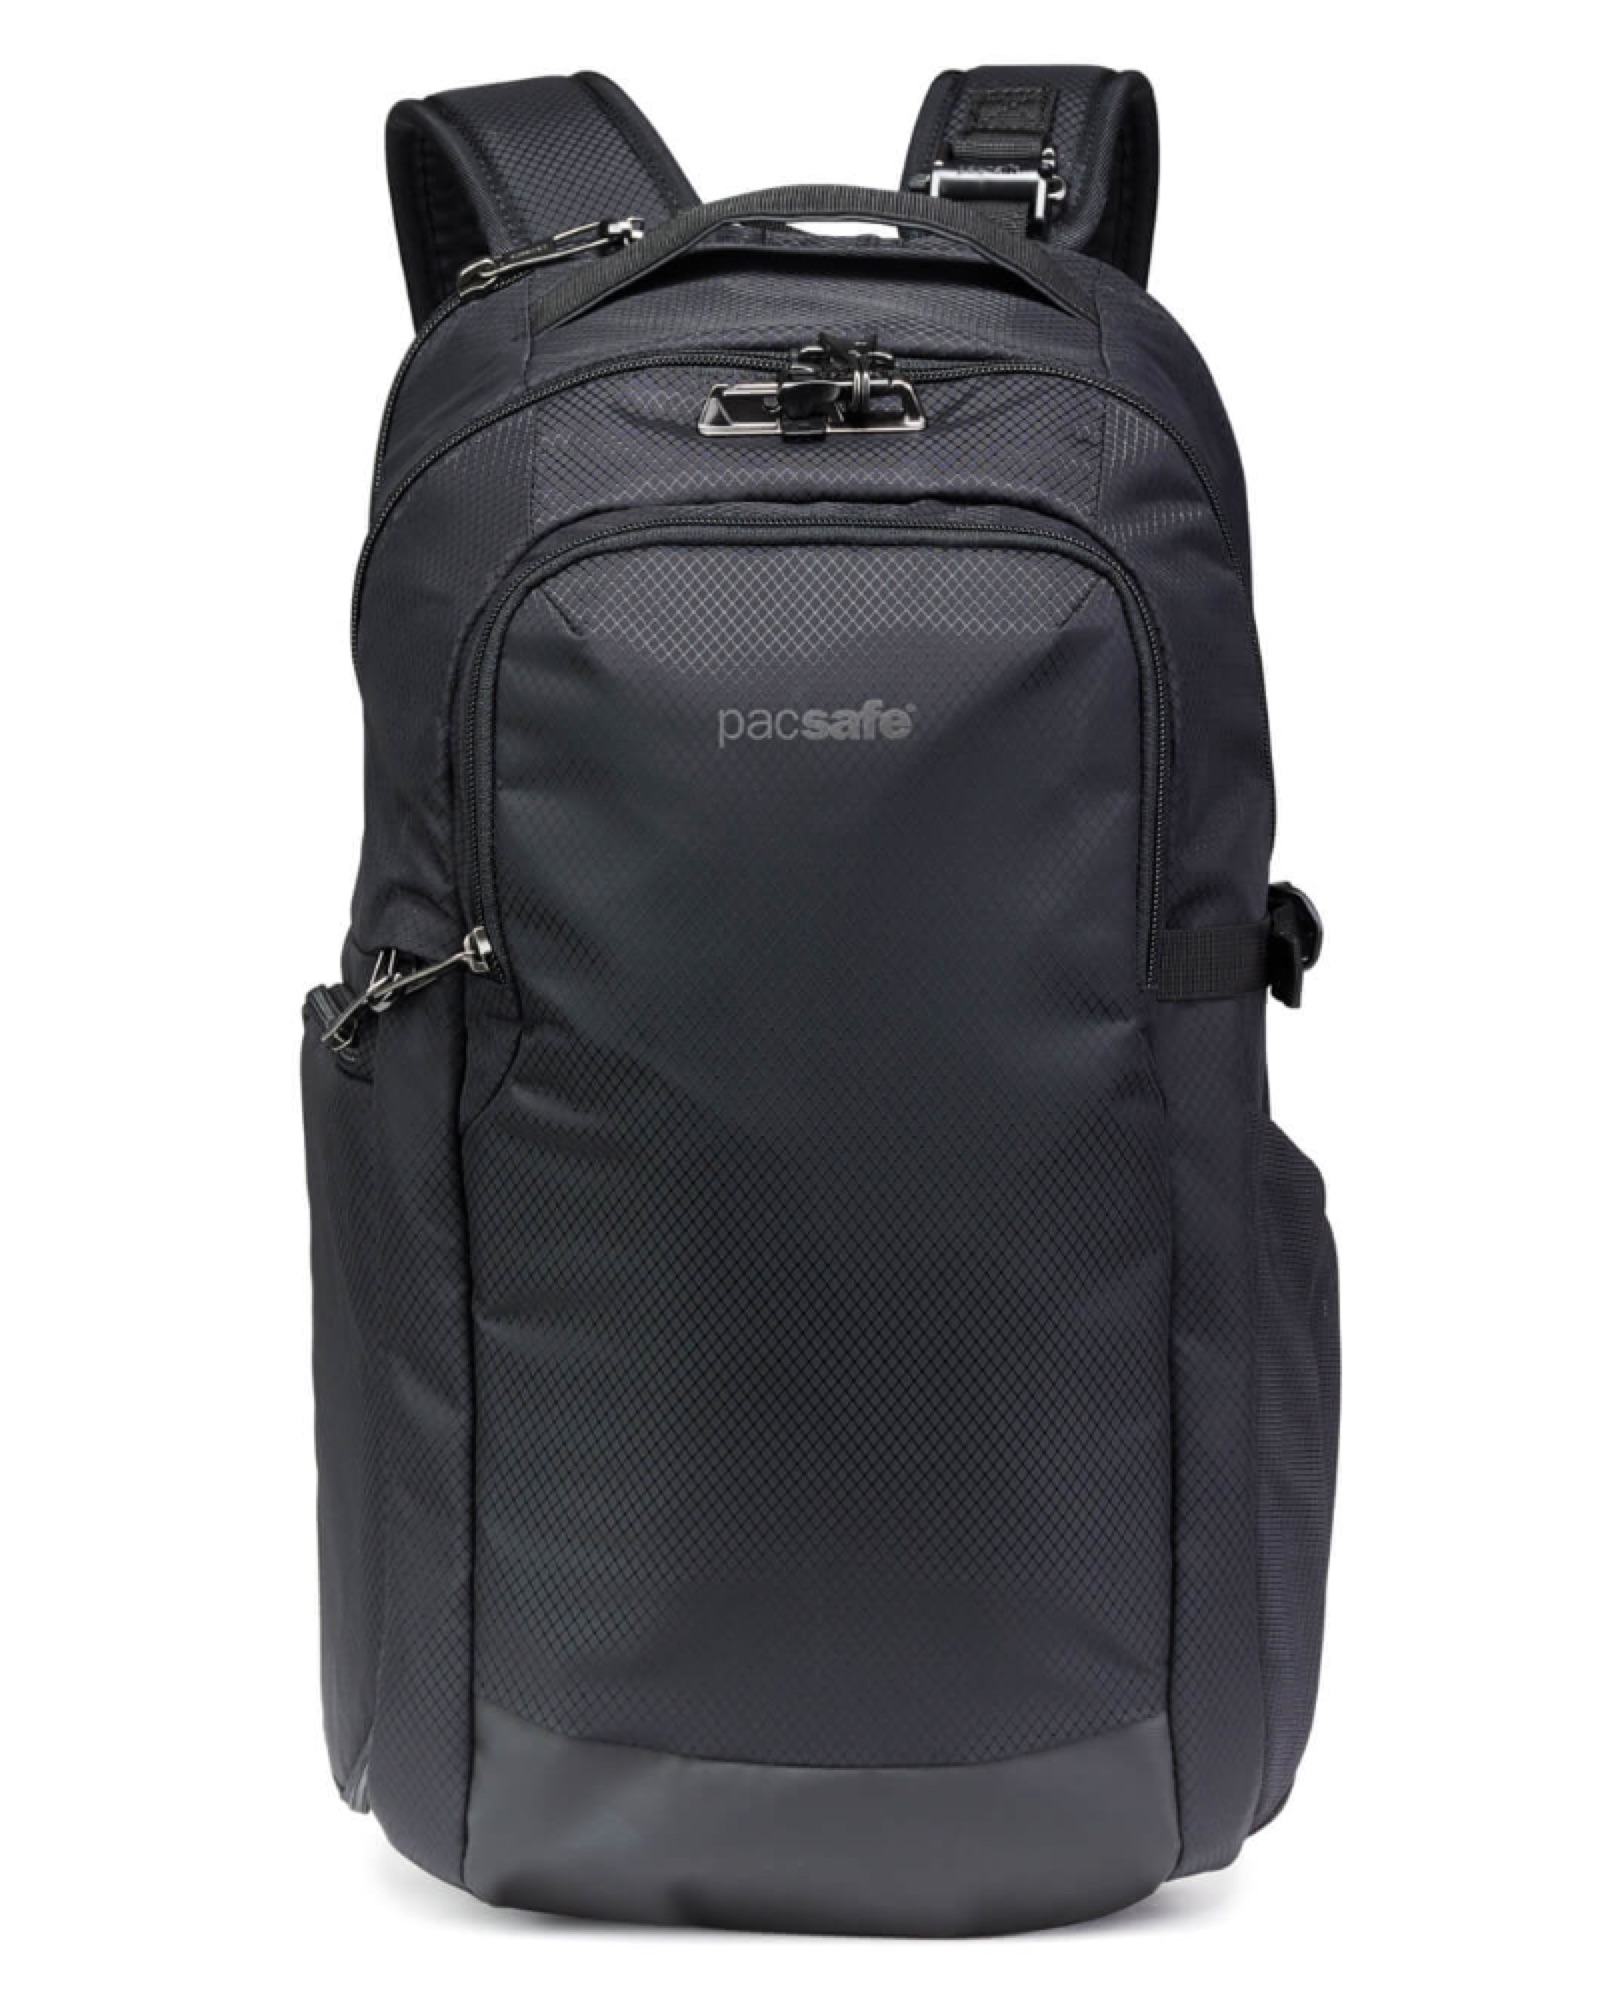 Pacsafe Camsafe X 17L Anti-Theft Camera Backpack - Black by Pacsafe ...